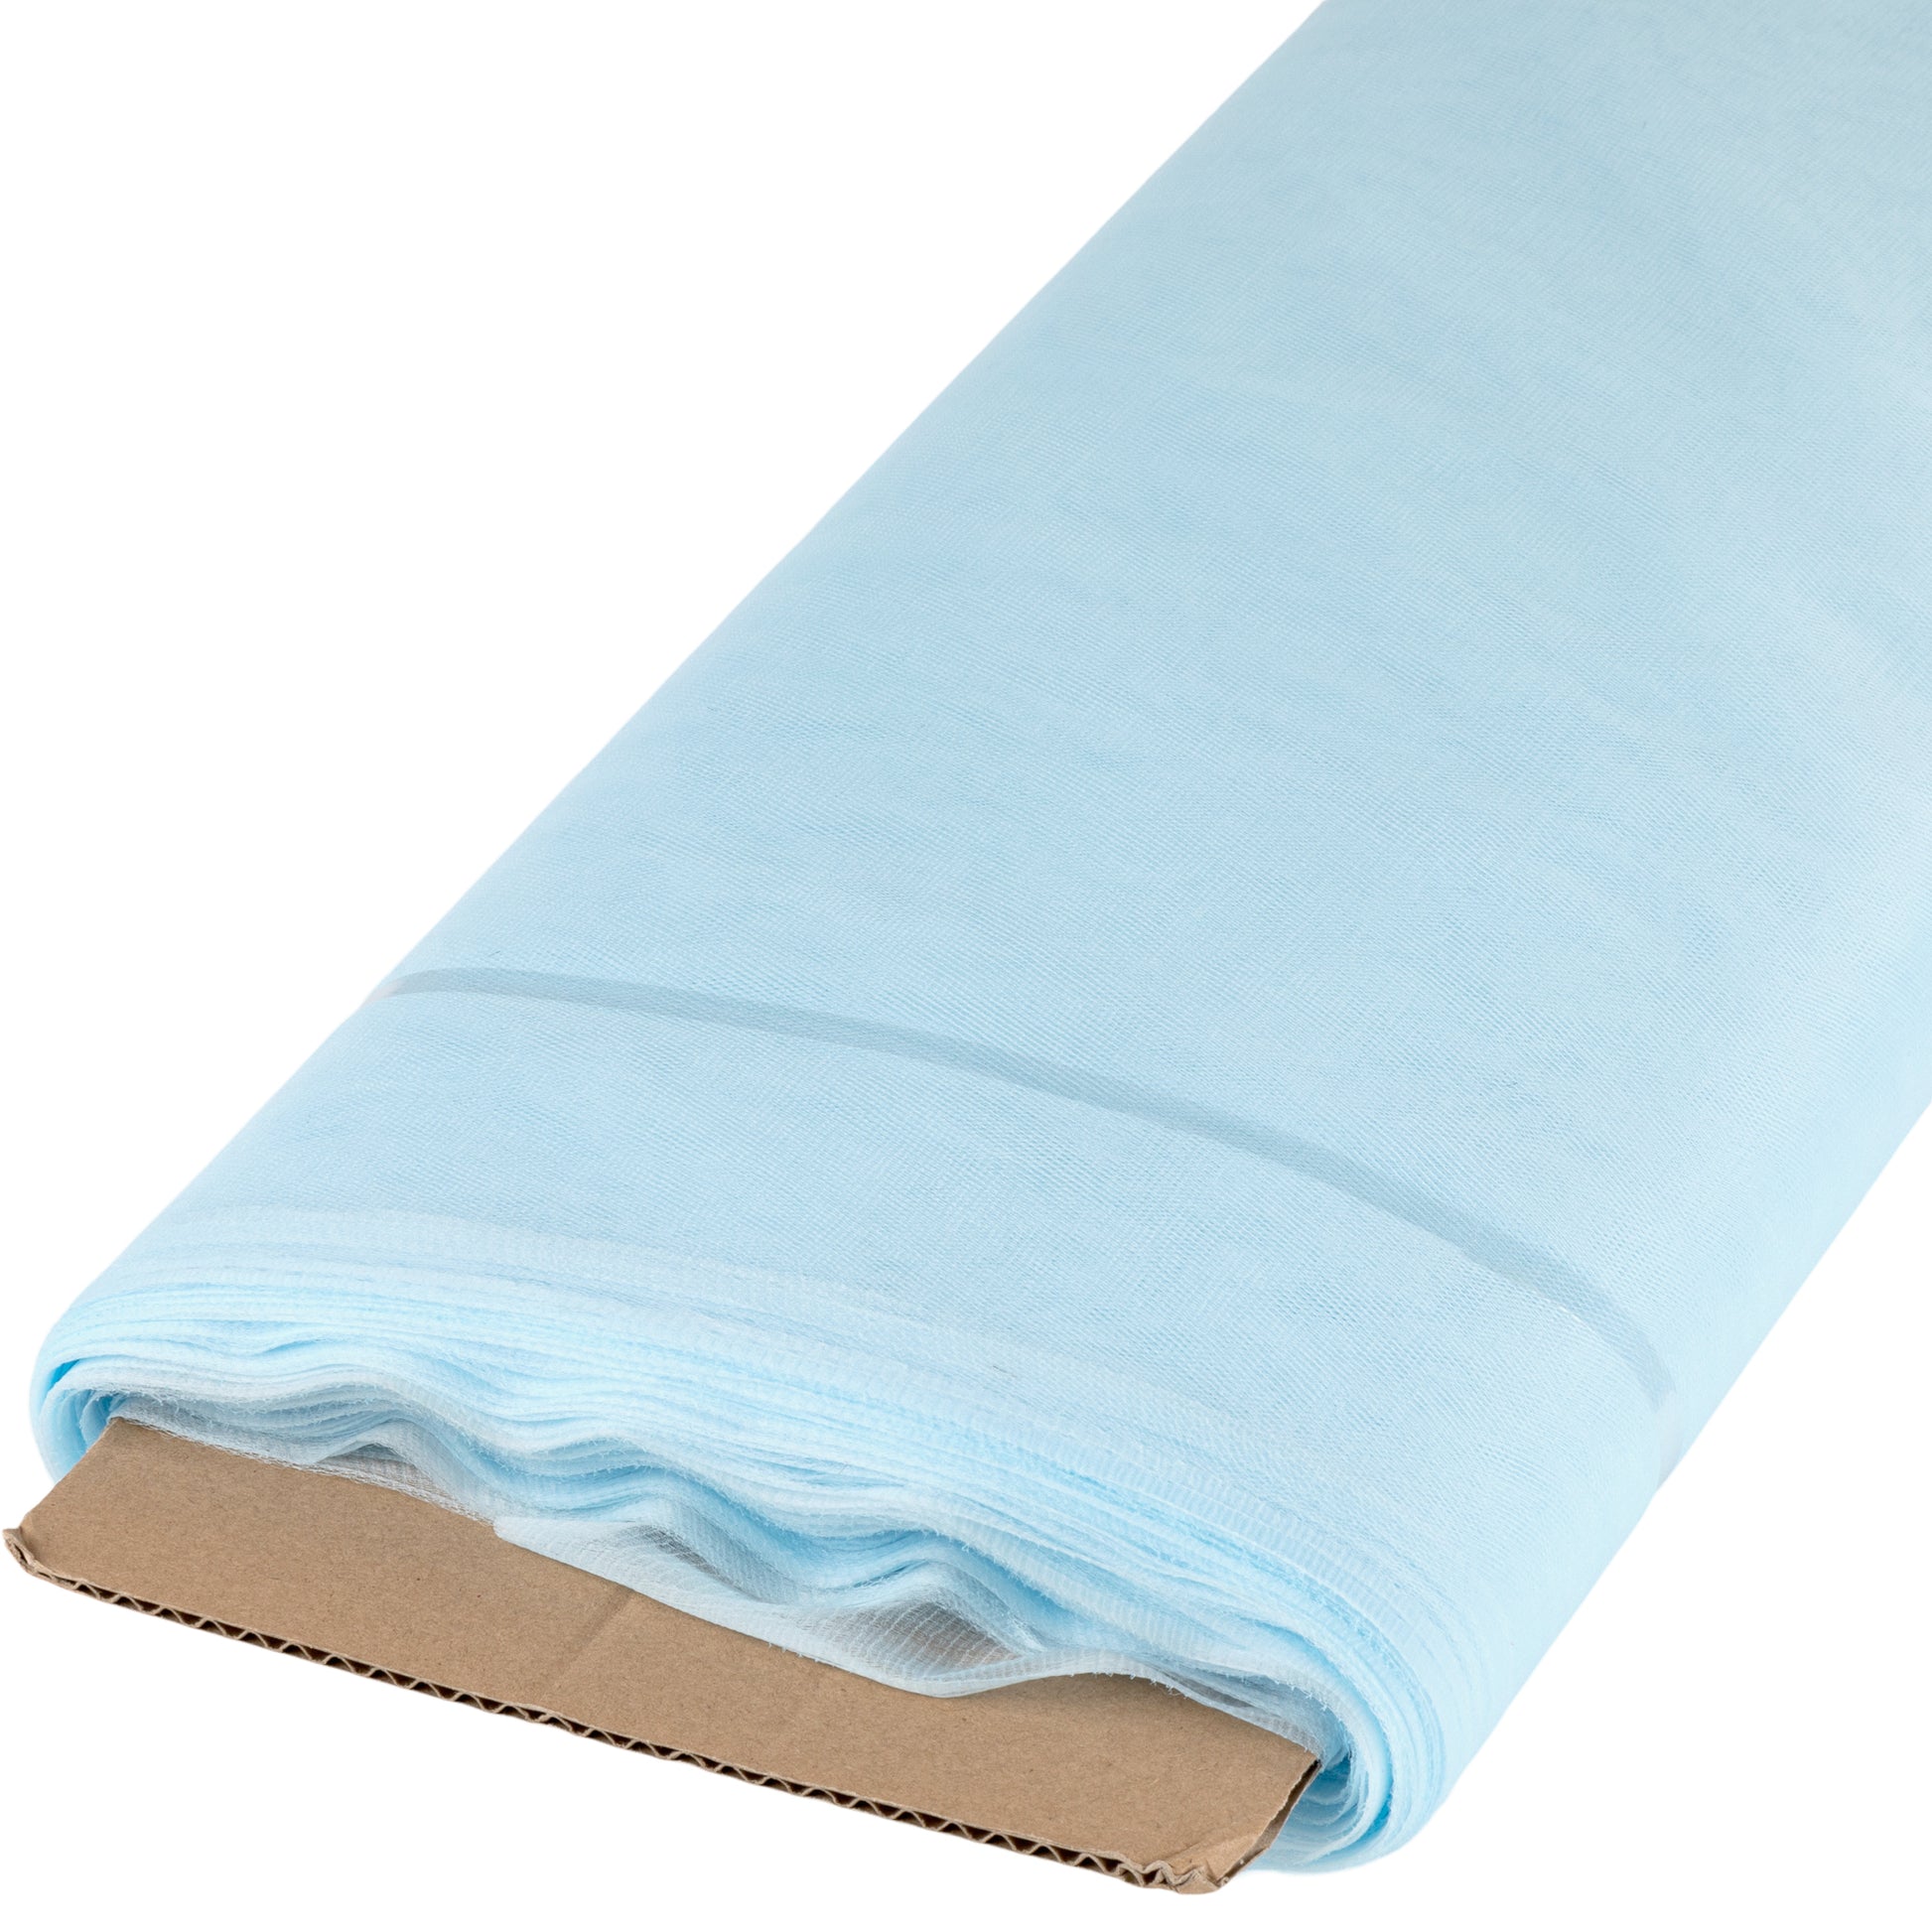 Soft Tulle Fabric Roll 54" x 40 yds - Baby Blue